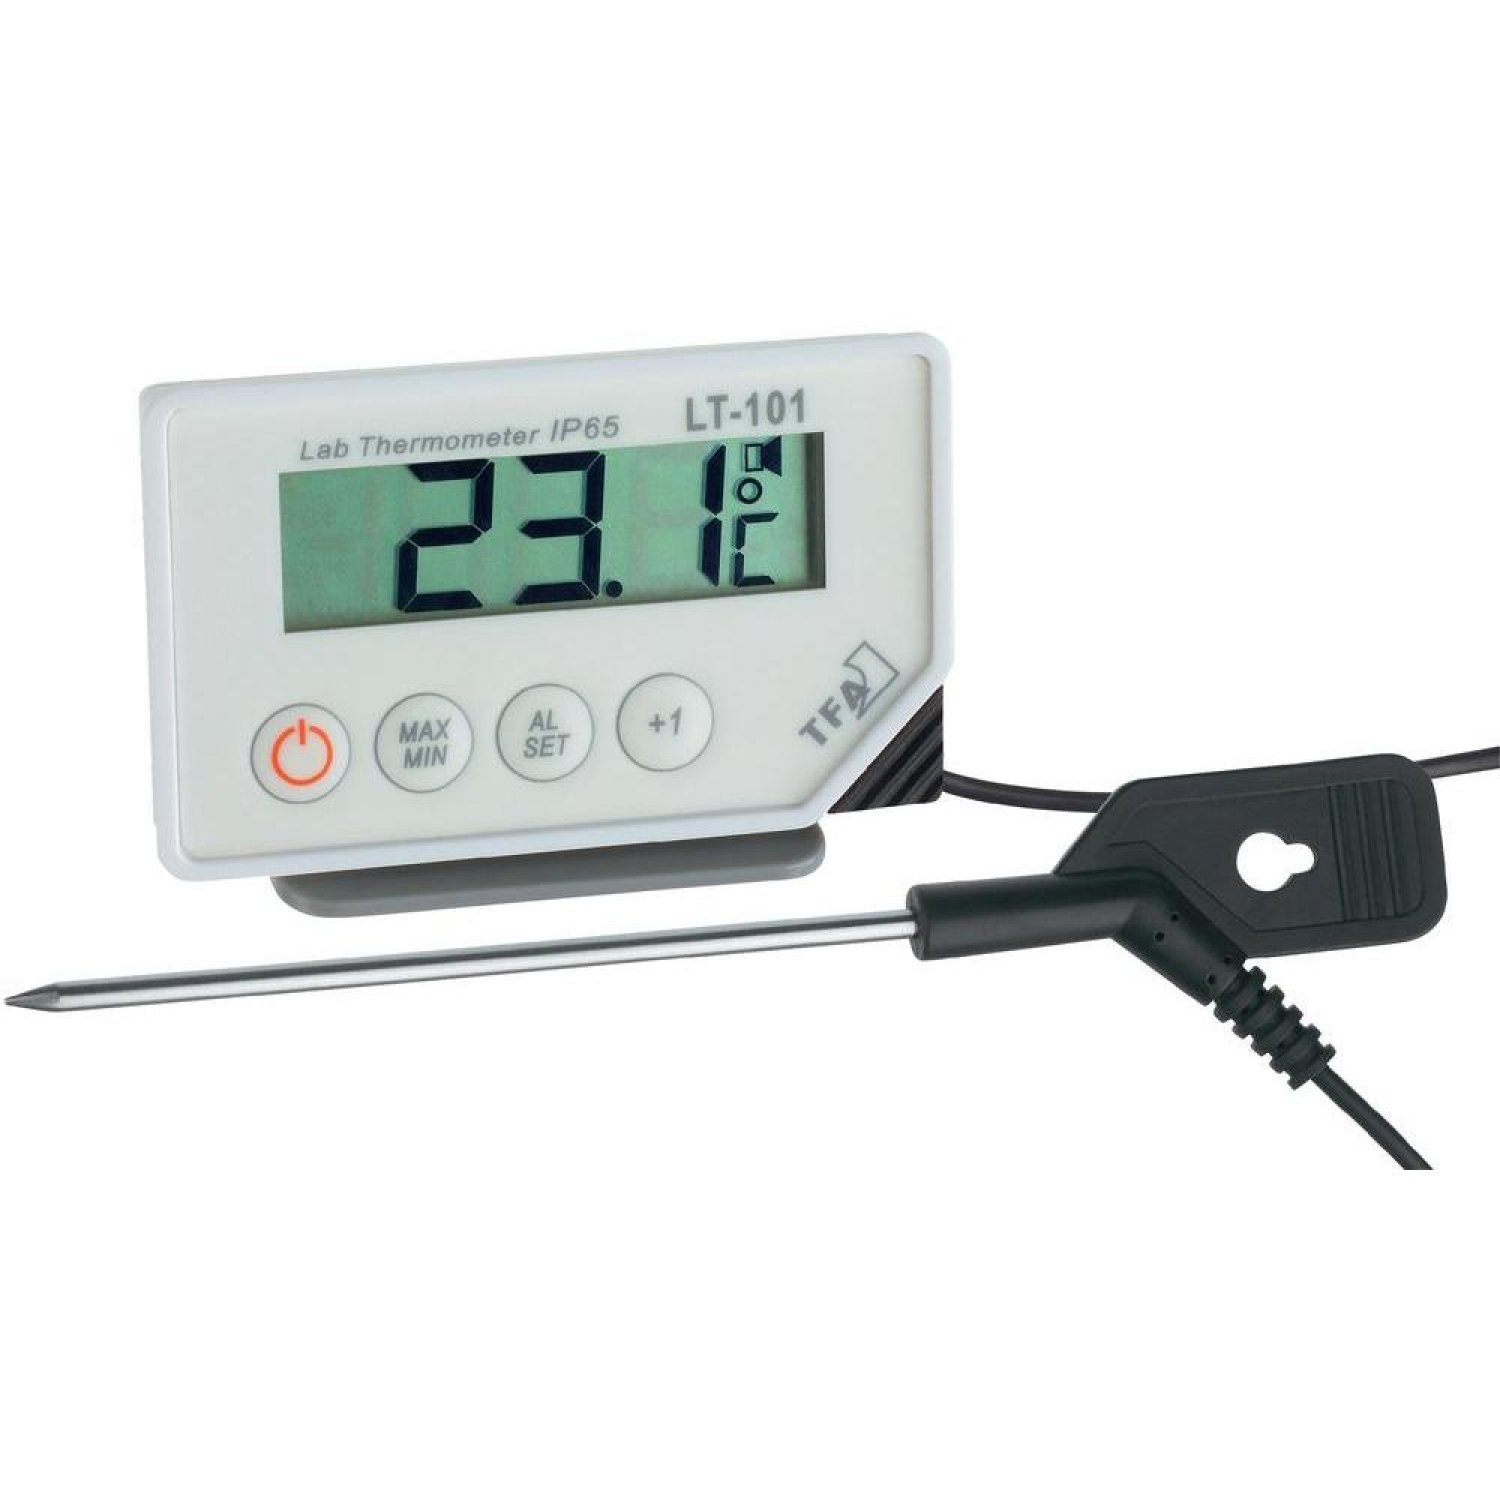 https://www.avola-coffeesystems.de/images/g/8069592-thermometer-tfa-dost-1500-1500-85.jpg